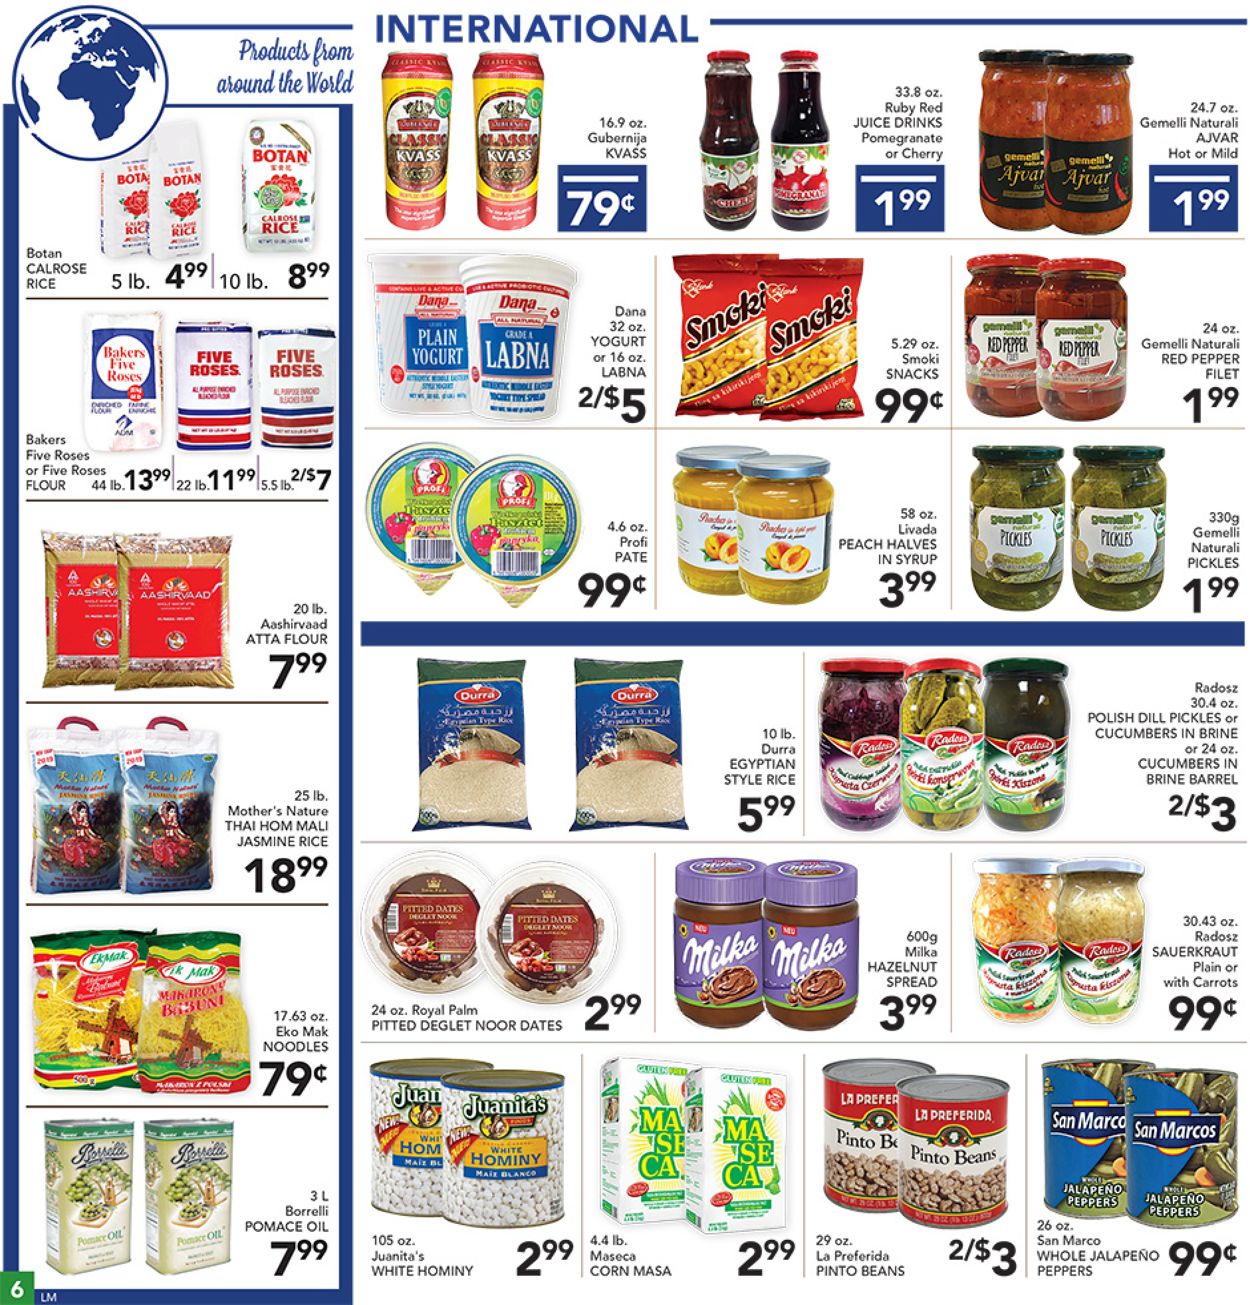 Catalogue Pete's Fresh Market from 11/11/2020